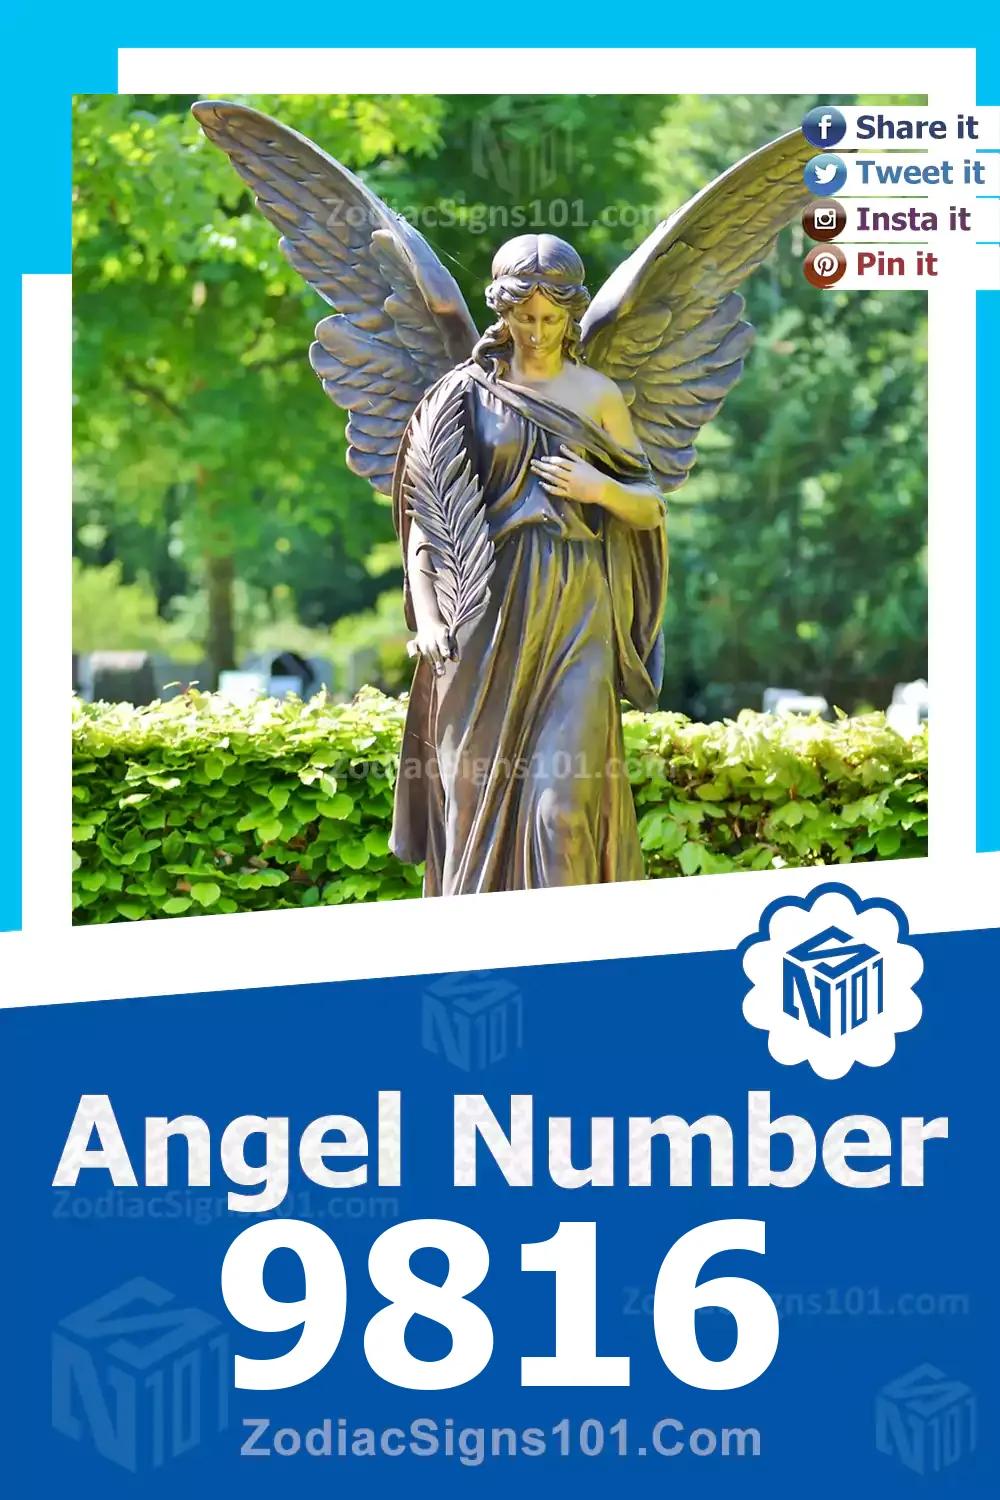 9816 Angel Number Meaning